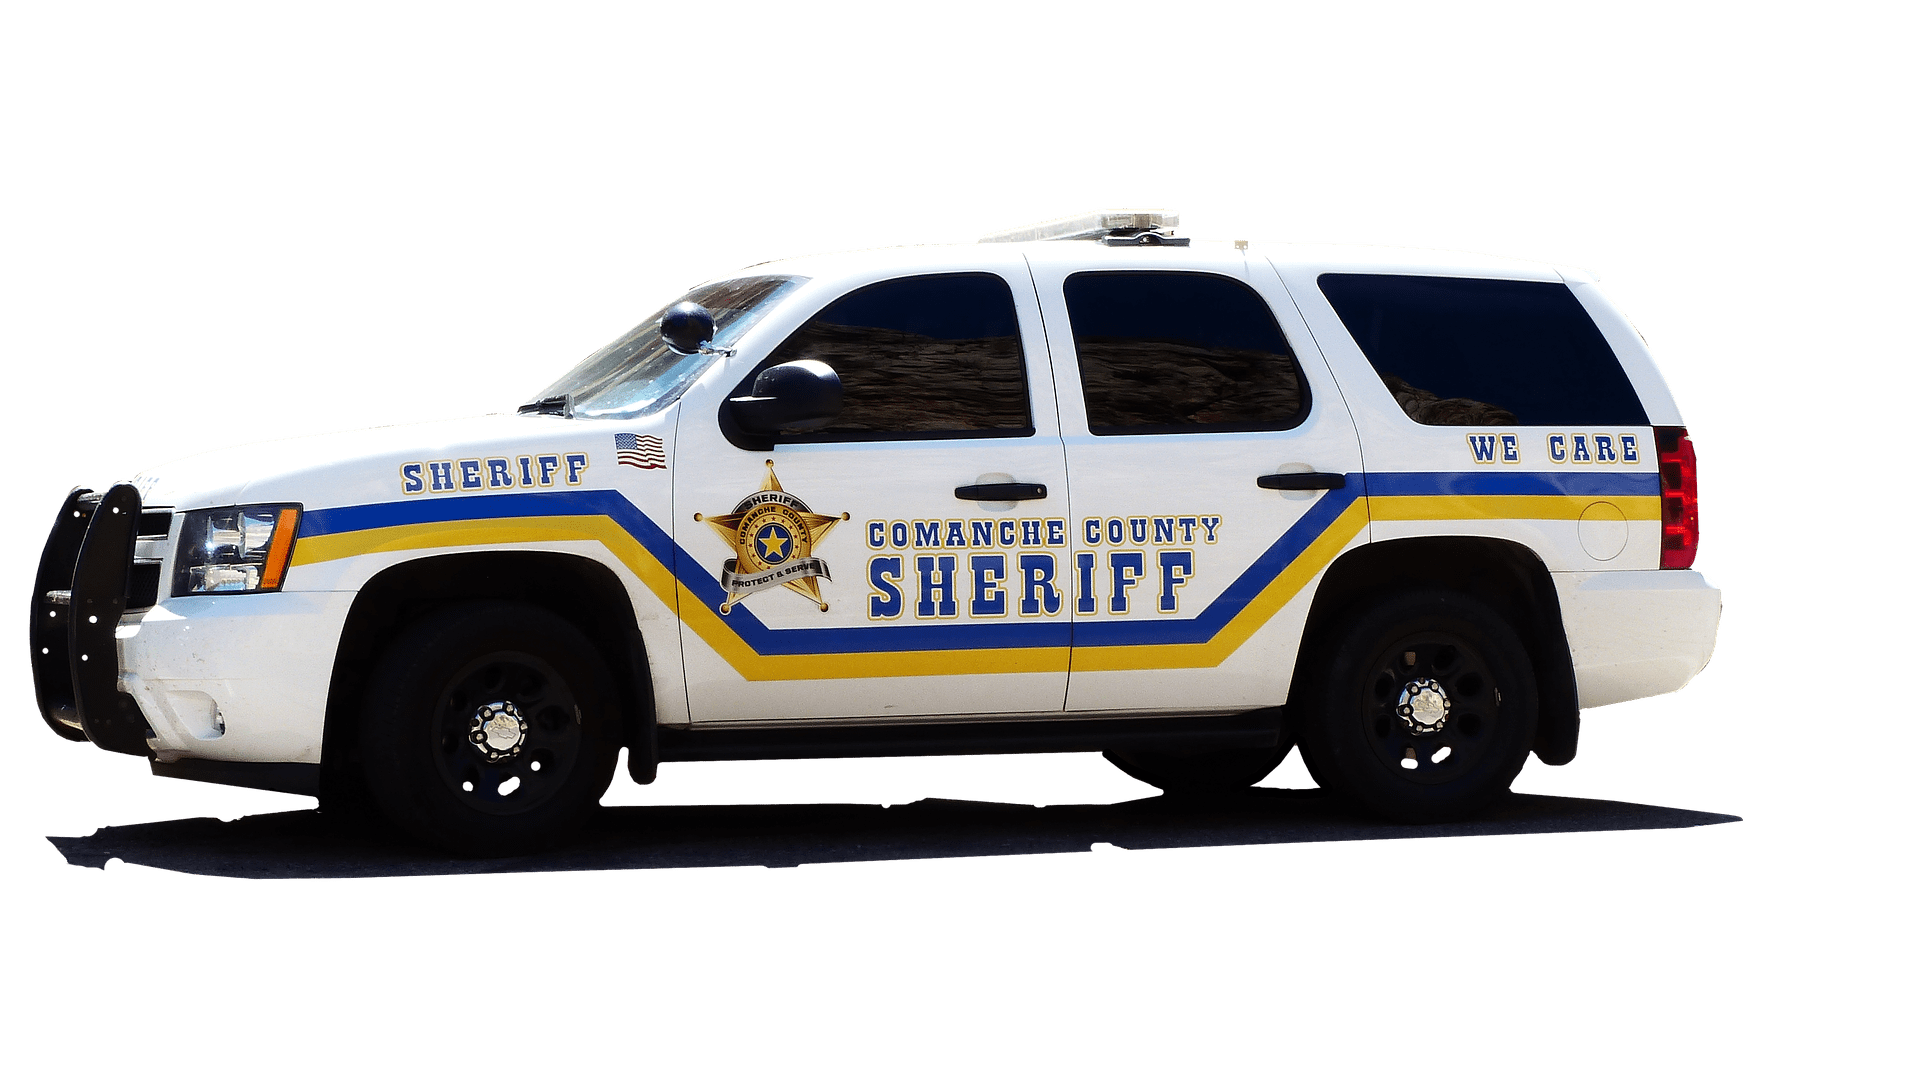 Pictured - A police sheriff vehicle | Source: Pixabay